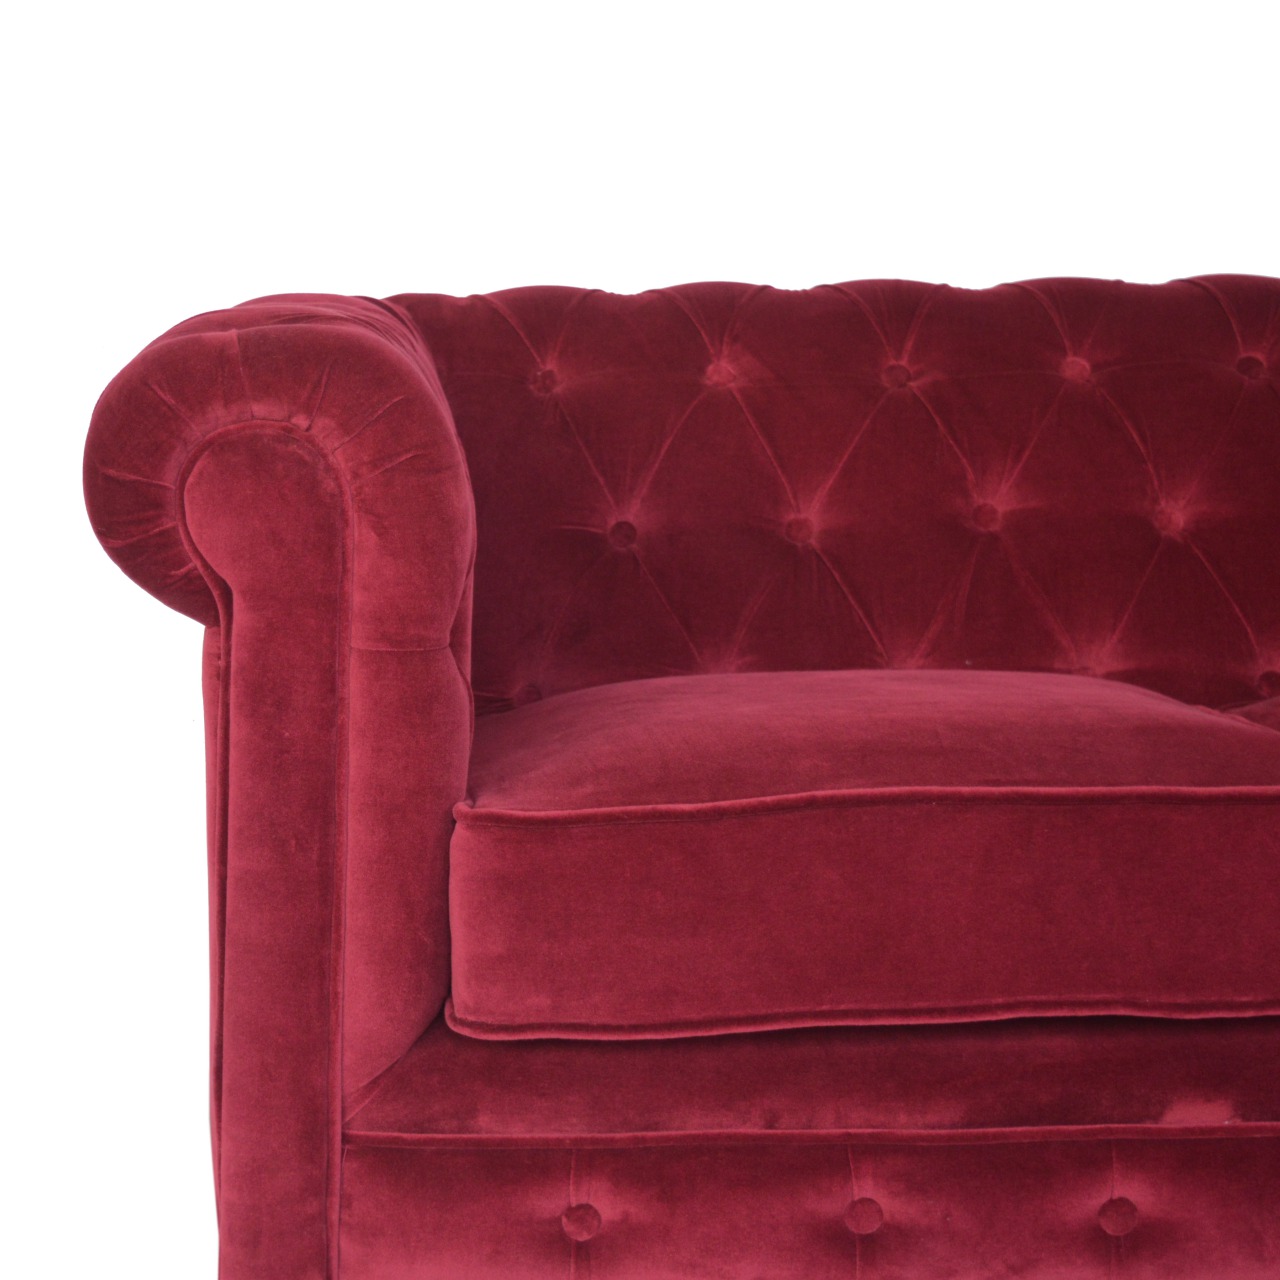 Wholesale & Dropship Wine Red Velvet Chesterfield Sofa Suppliers